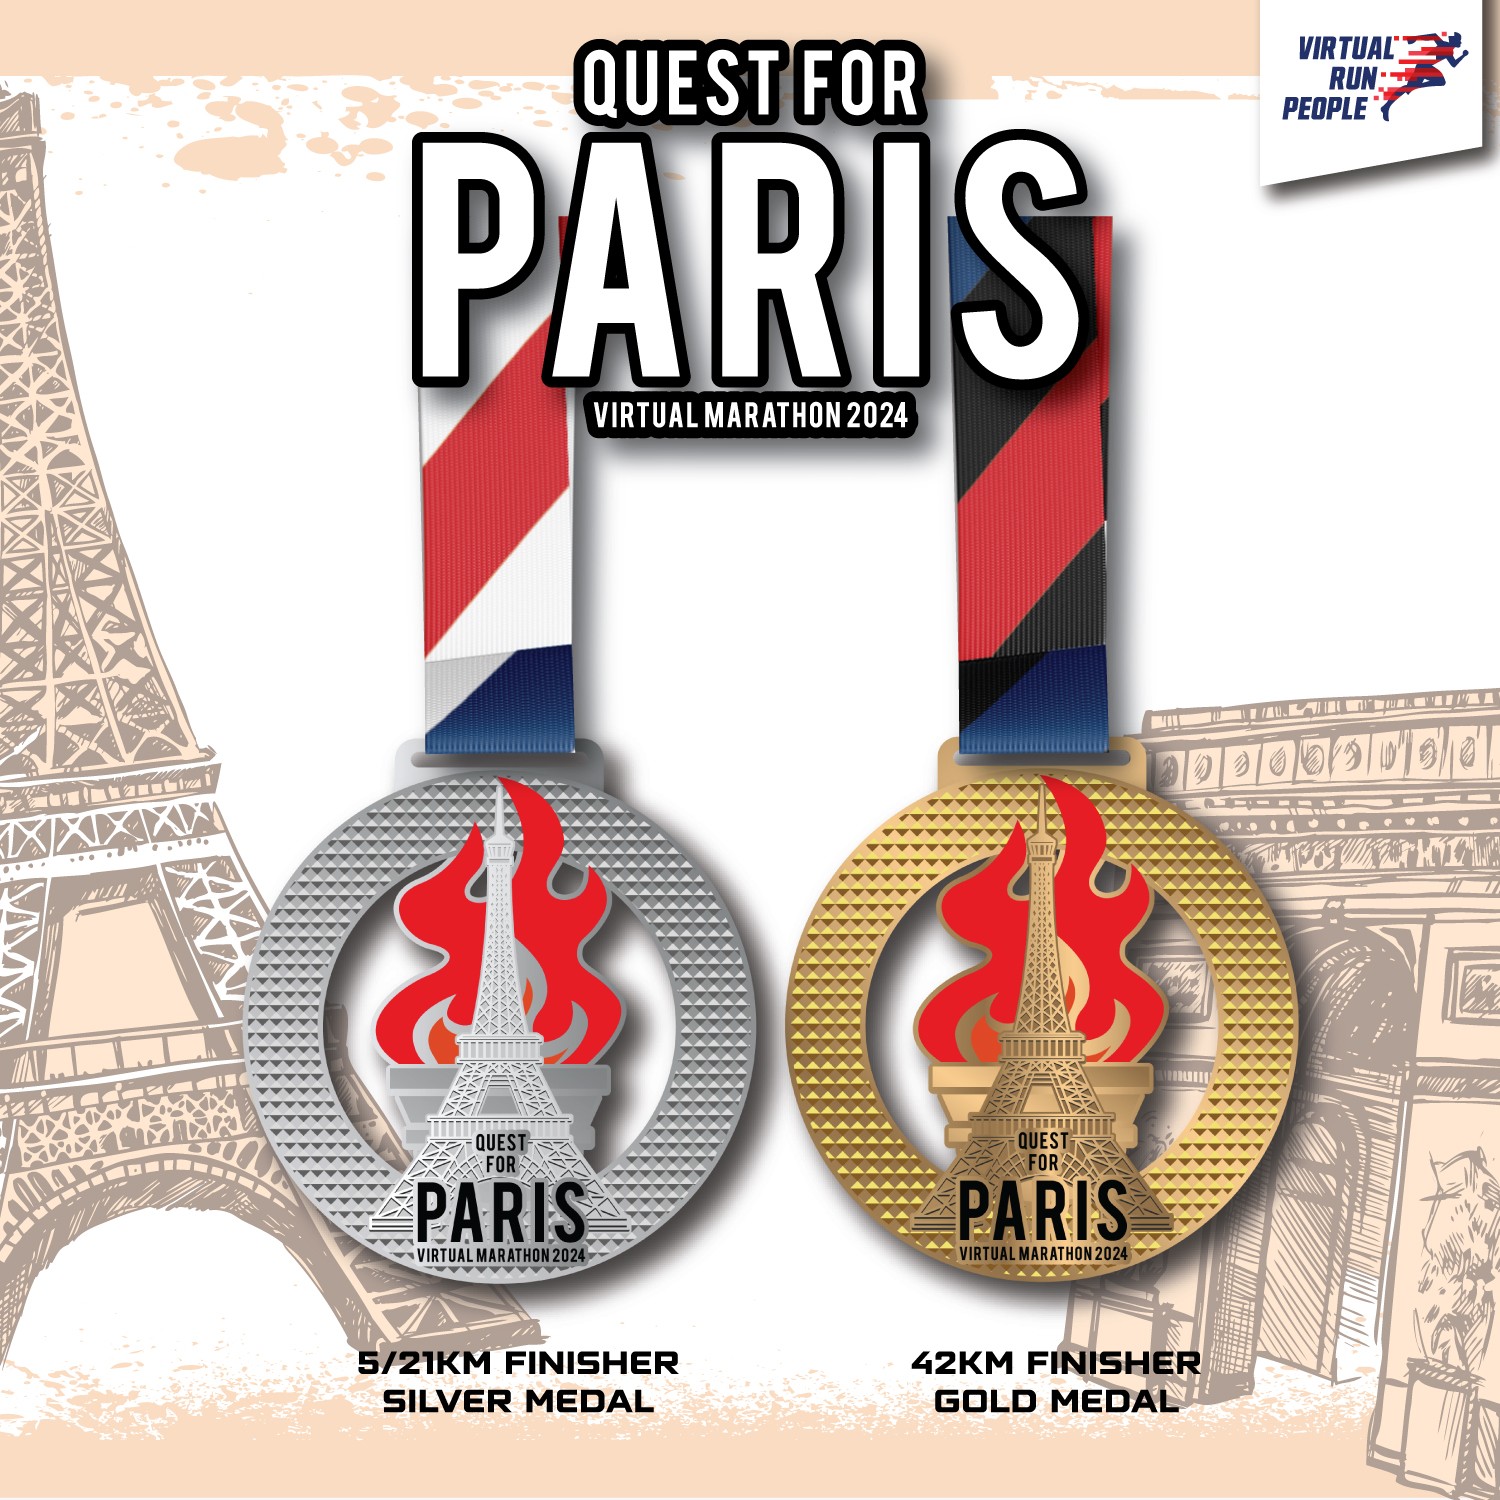 https://heyjom-production-assets.s3.ap-southeast-1.amazonaws.com/event_sections%2F1714%2FQuest+For+Paris+VR+Medal.jpg